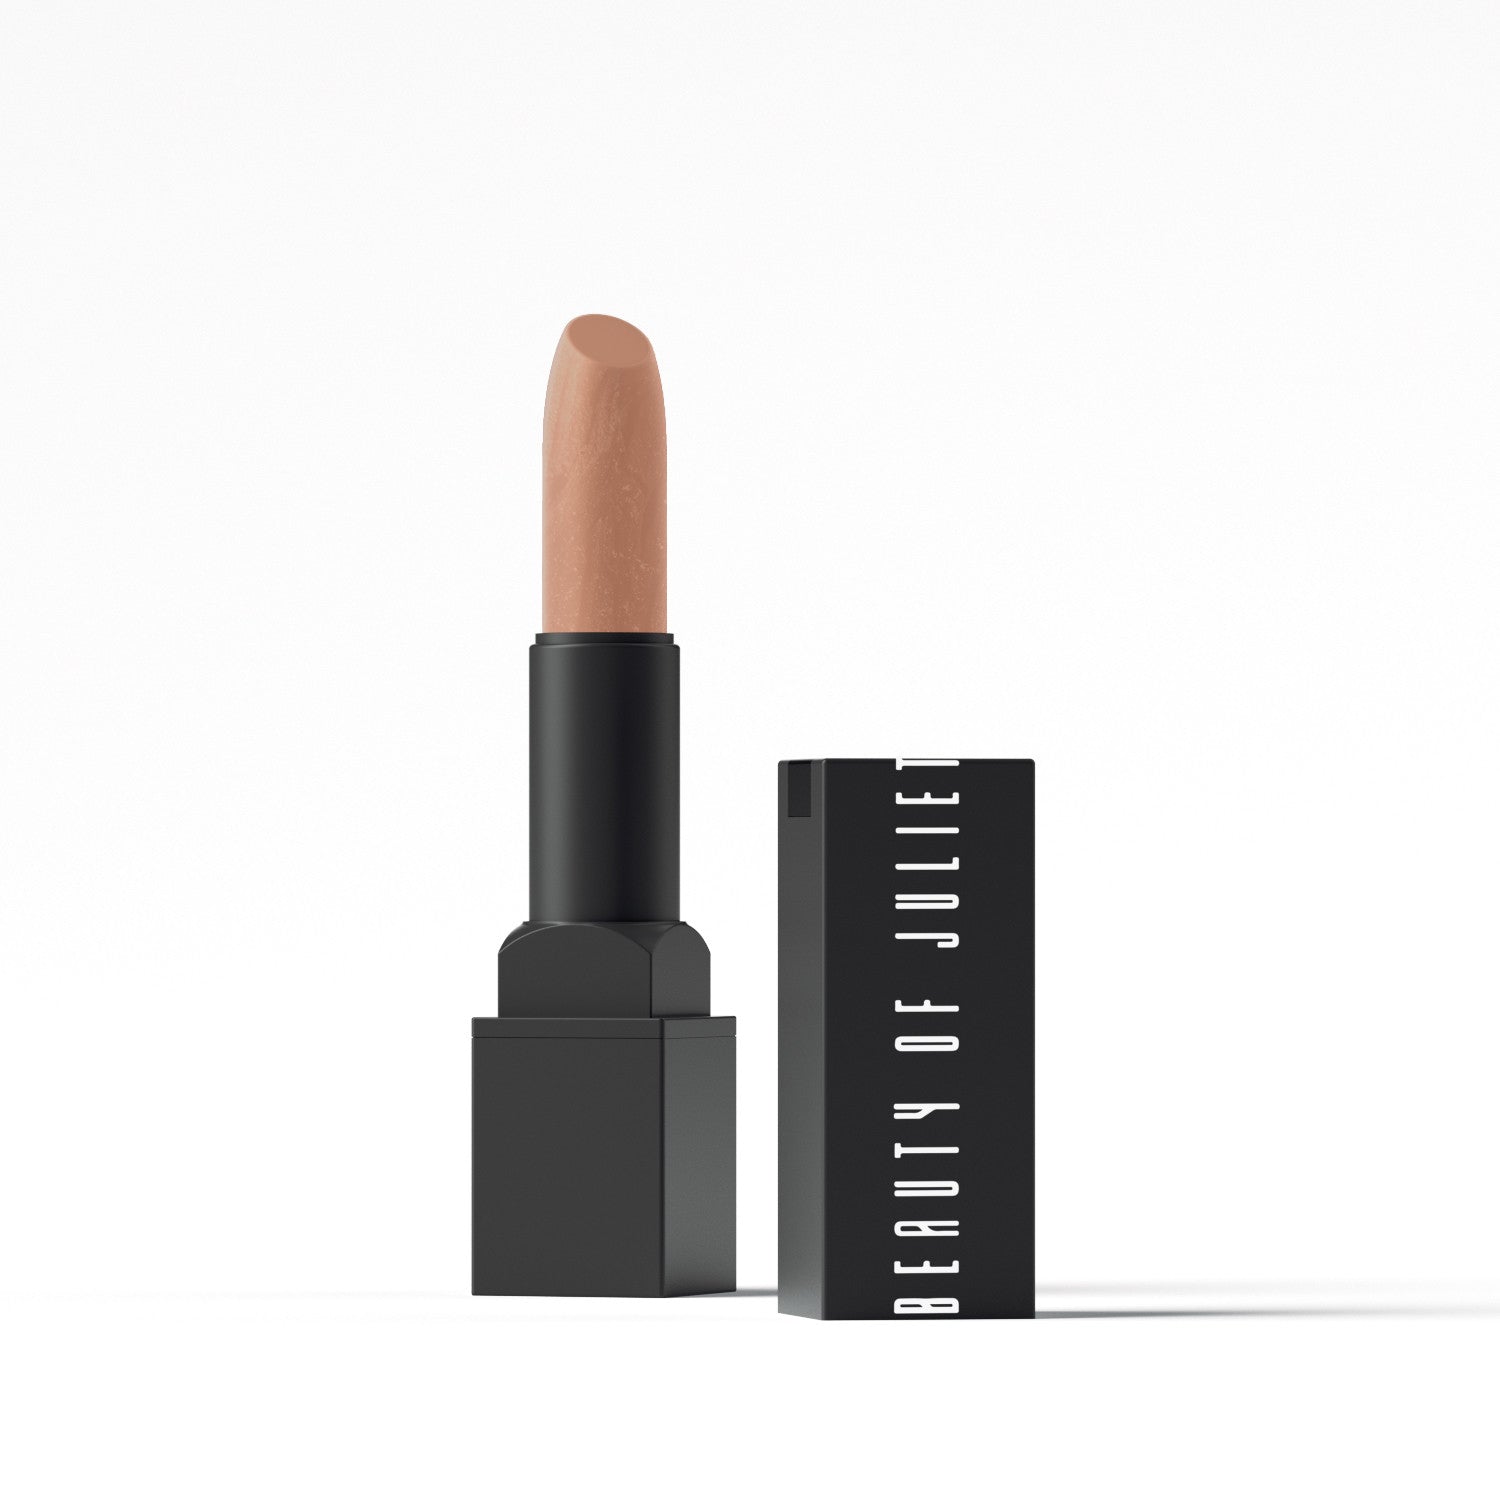 Lipsticks By Matte - KME means the very best